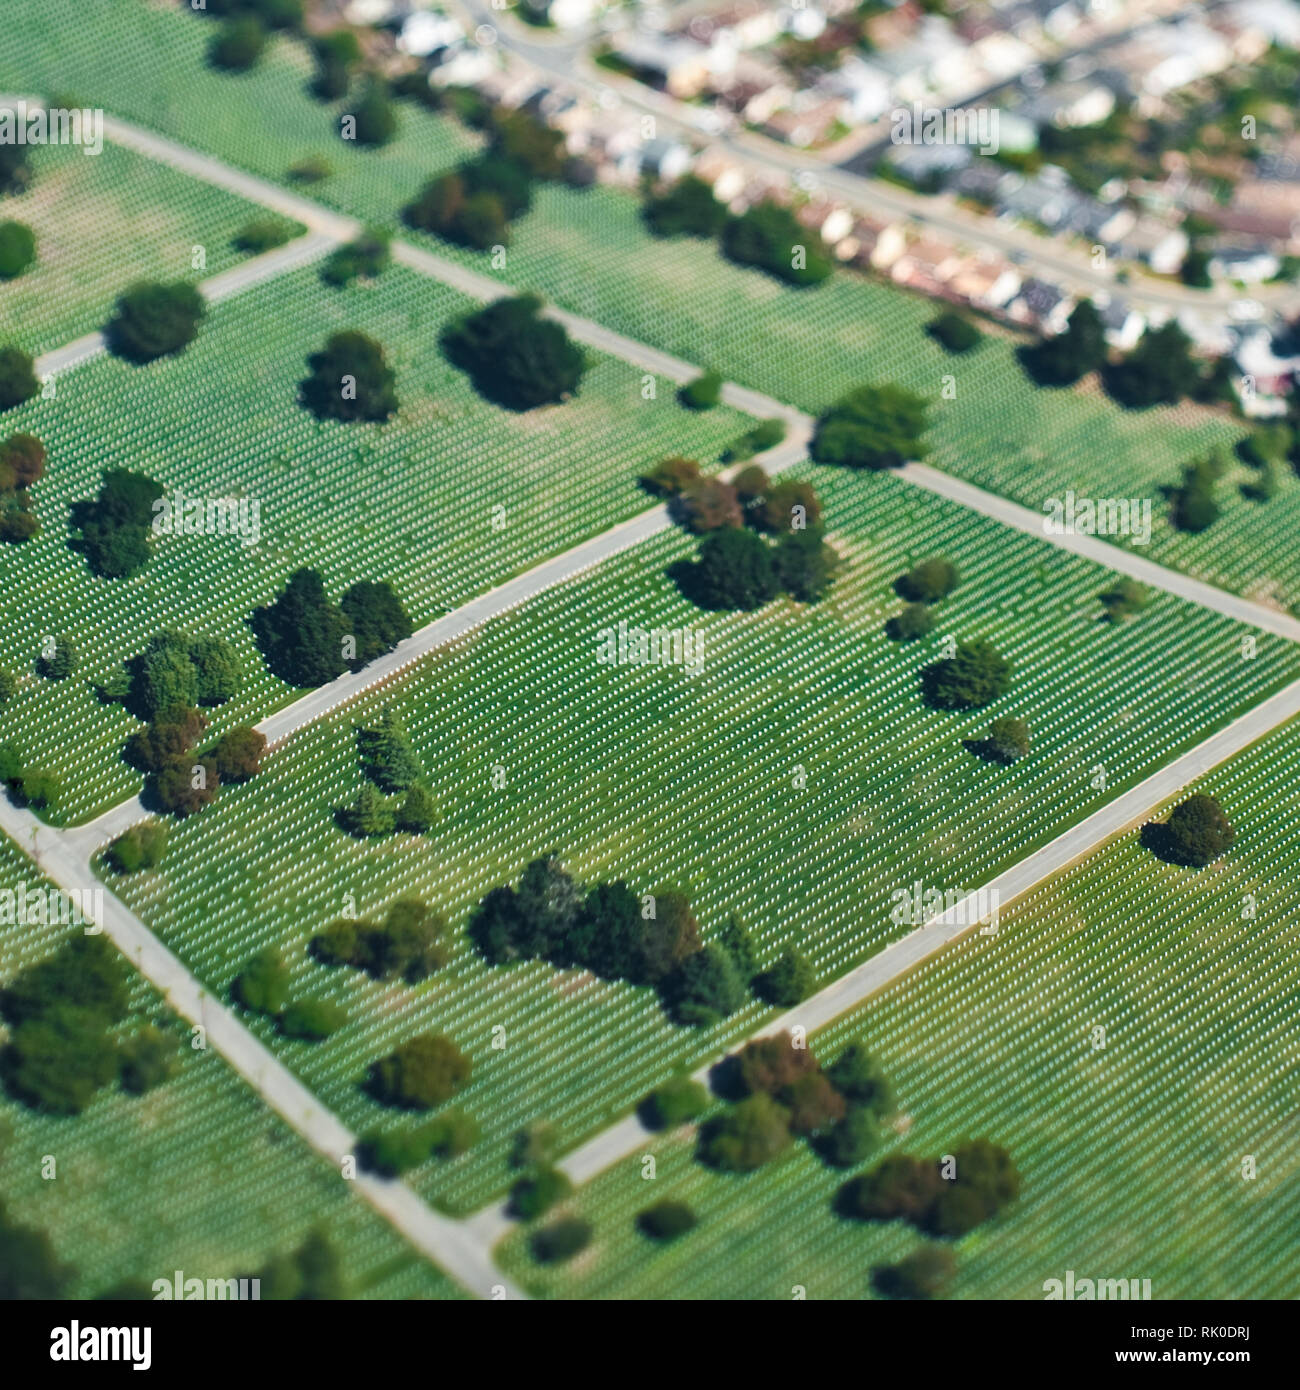 Aerial View of City Park Stock Photo